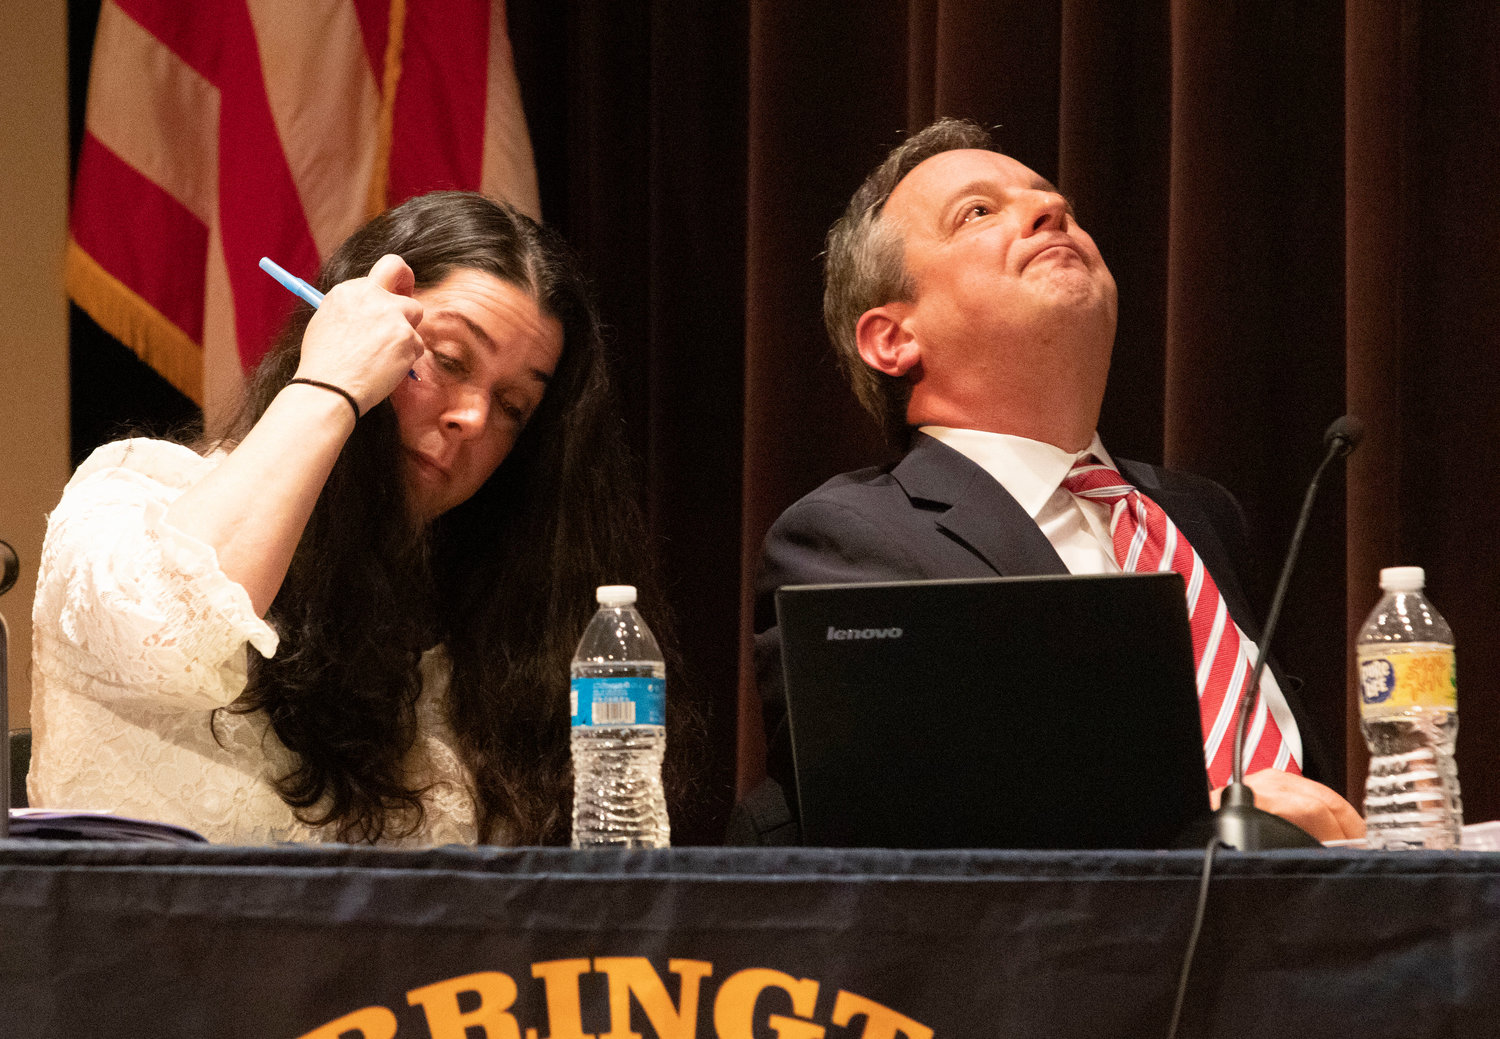 Attorney Greg Piccirilli reacts in frustration during a portion of the appeal hearing on Thursday night. Piccirilli represents teachers Kerri Thurber (left), and Brittany DiOrio and Stephanie Hines (not shown).